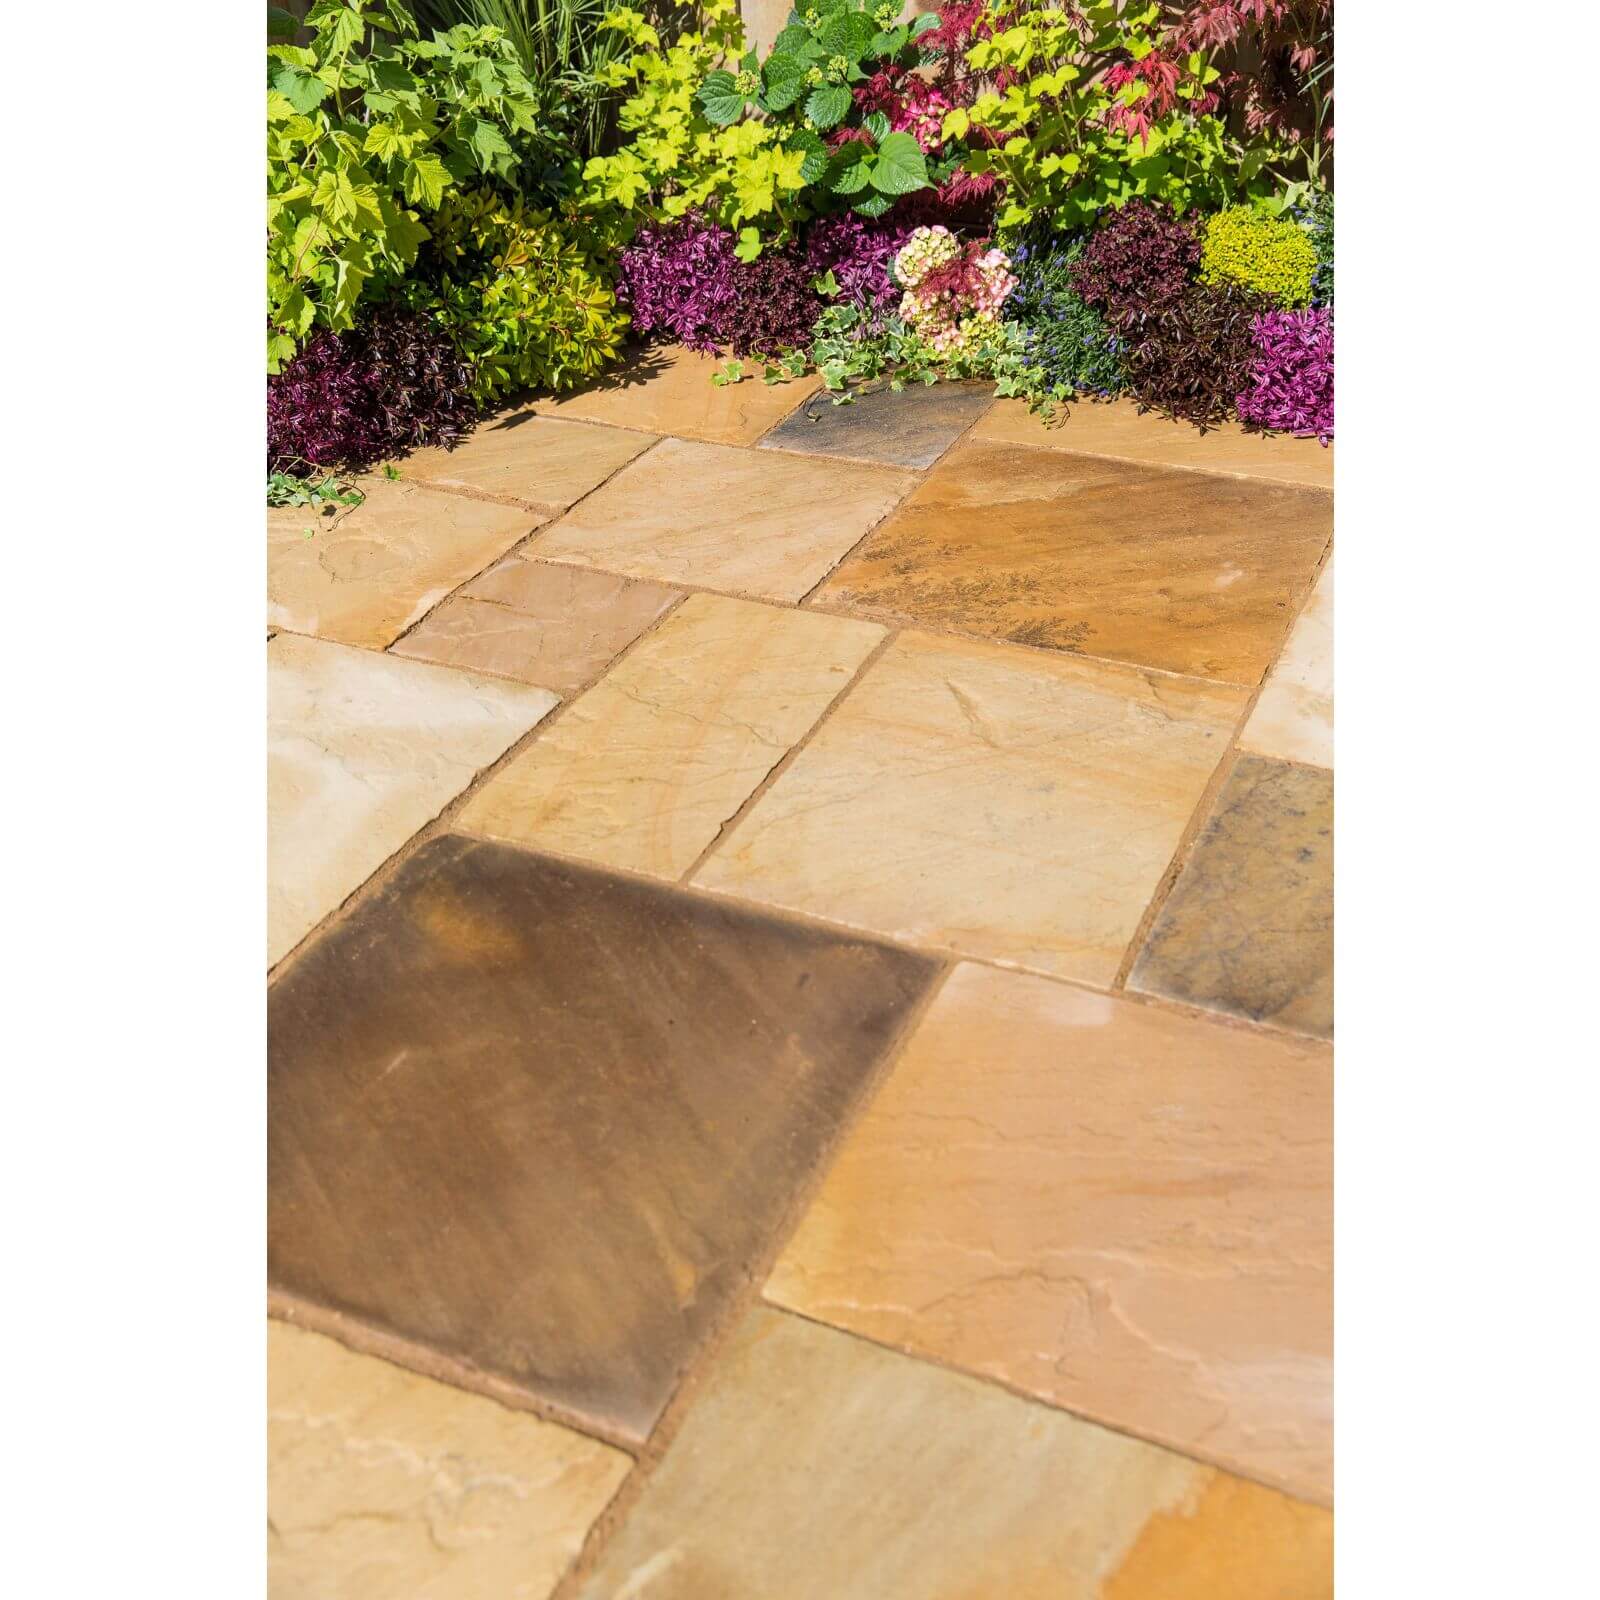 Stylish Stone Natural Sandstone 10.2sq m Eastern Sand - Full Pack of 46 Mixed Slabs